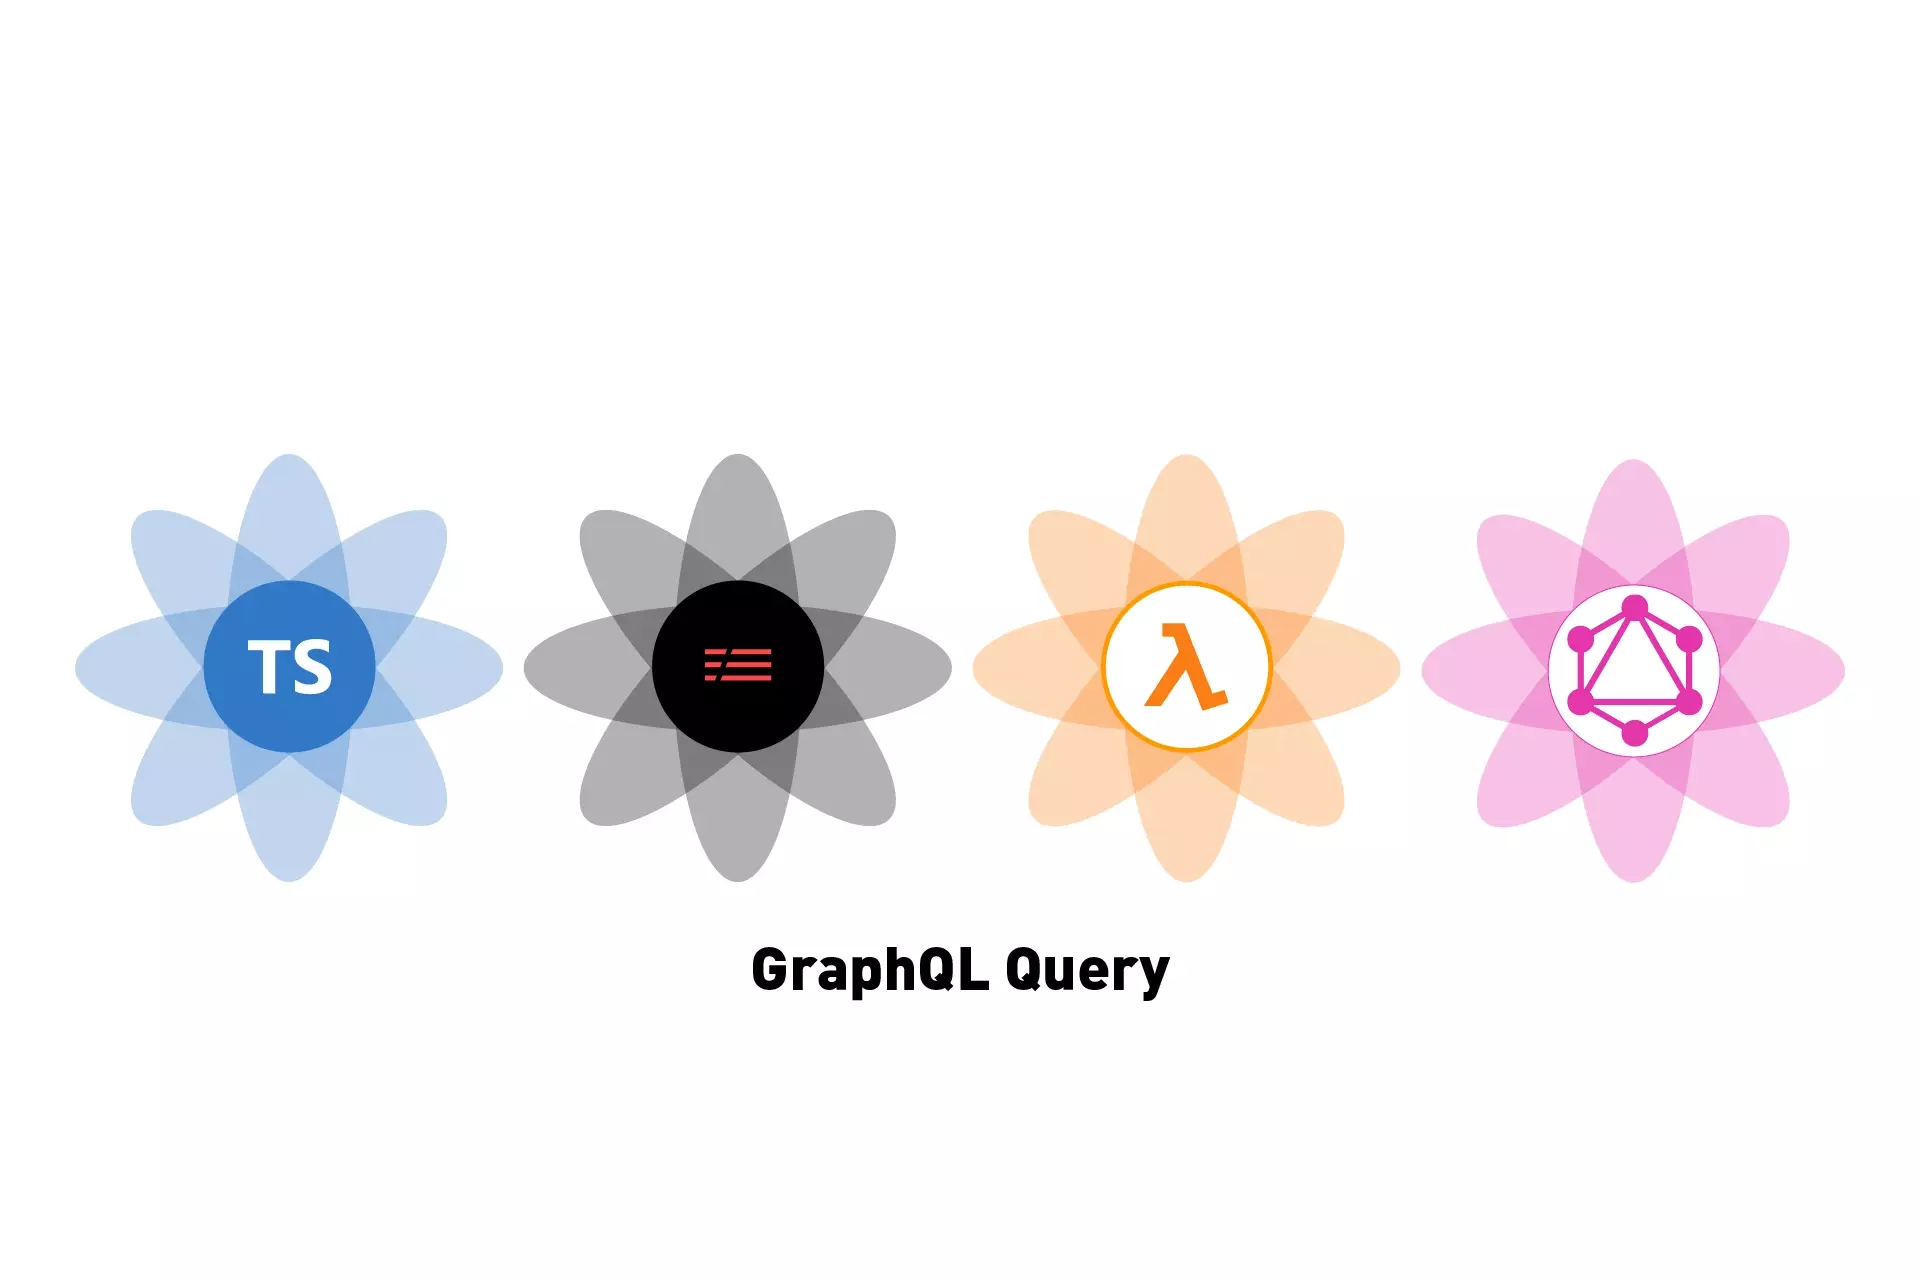 Four flowers that represent Typescript, Serverless, AWS Lambda and GraphQL side by side. Beneath them sits the text "GraphQL Query."